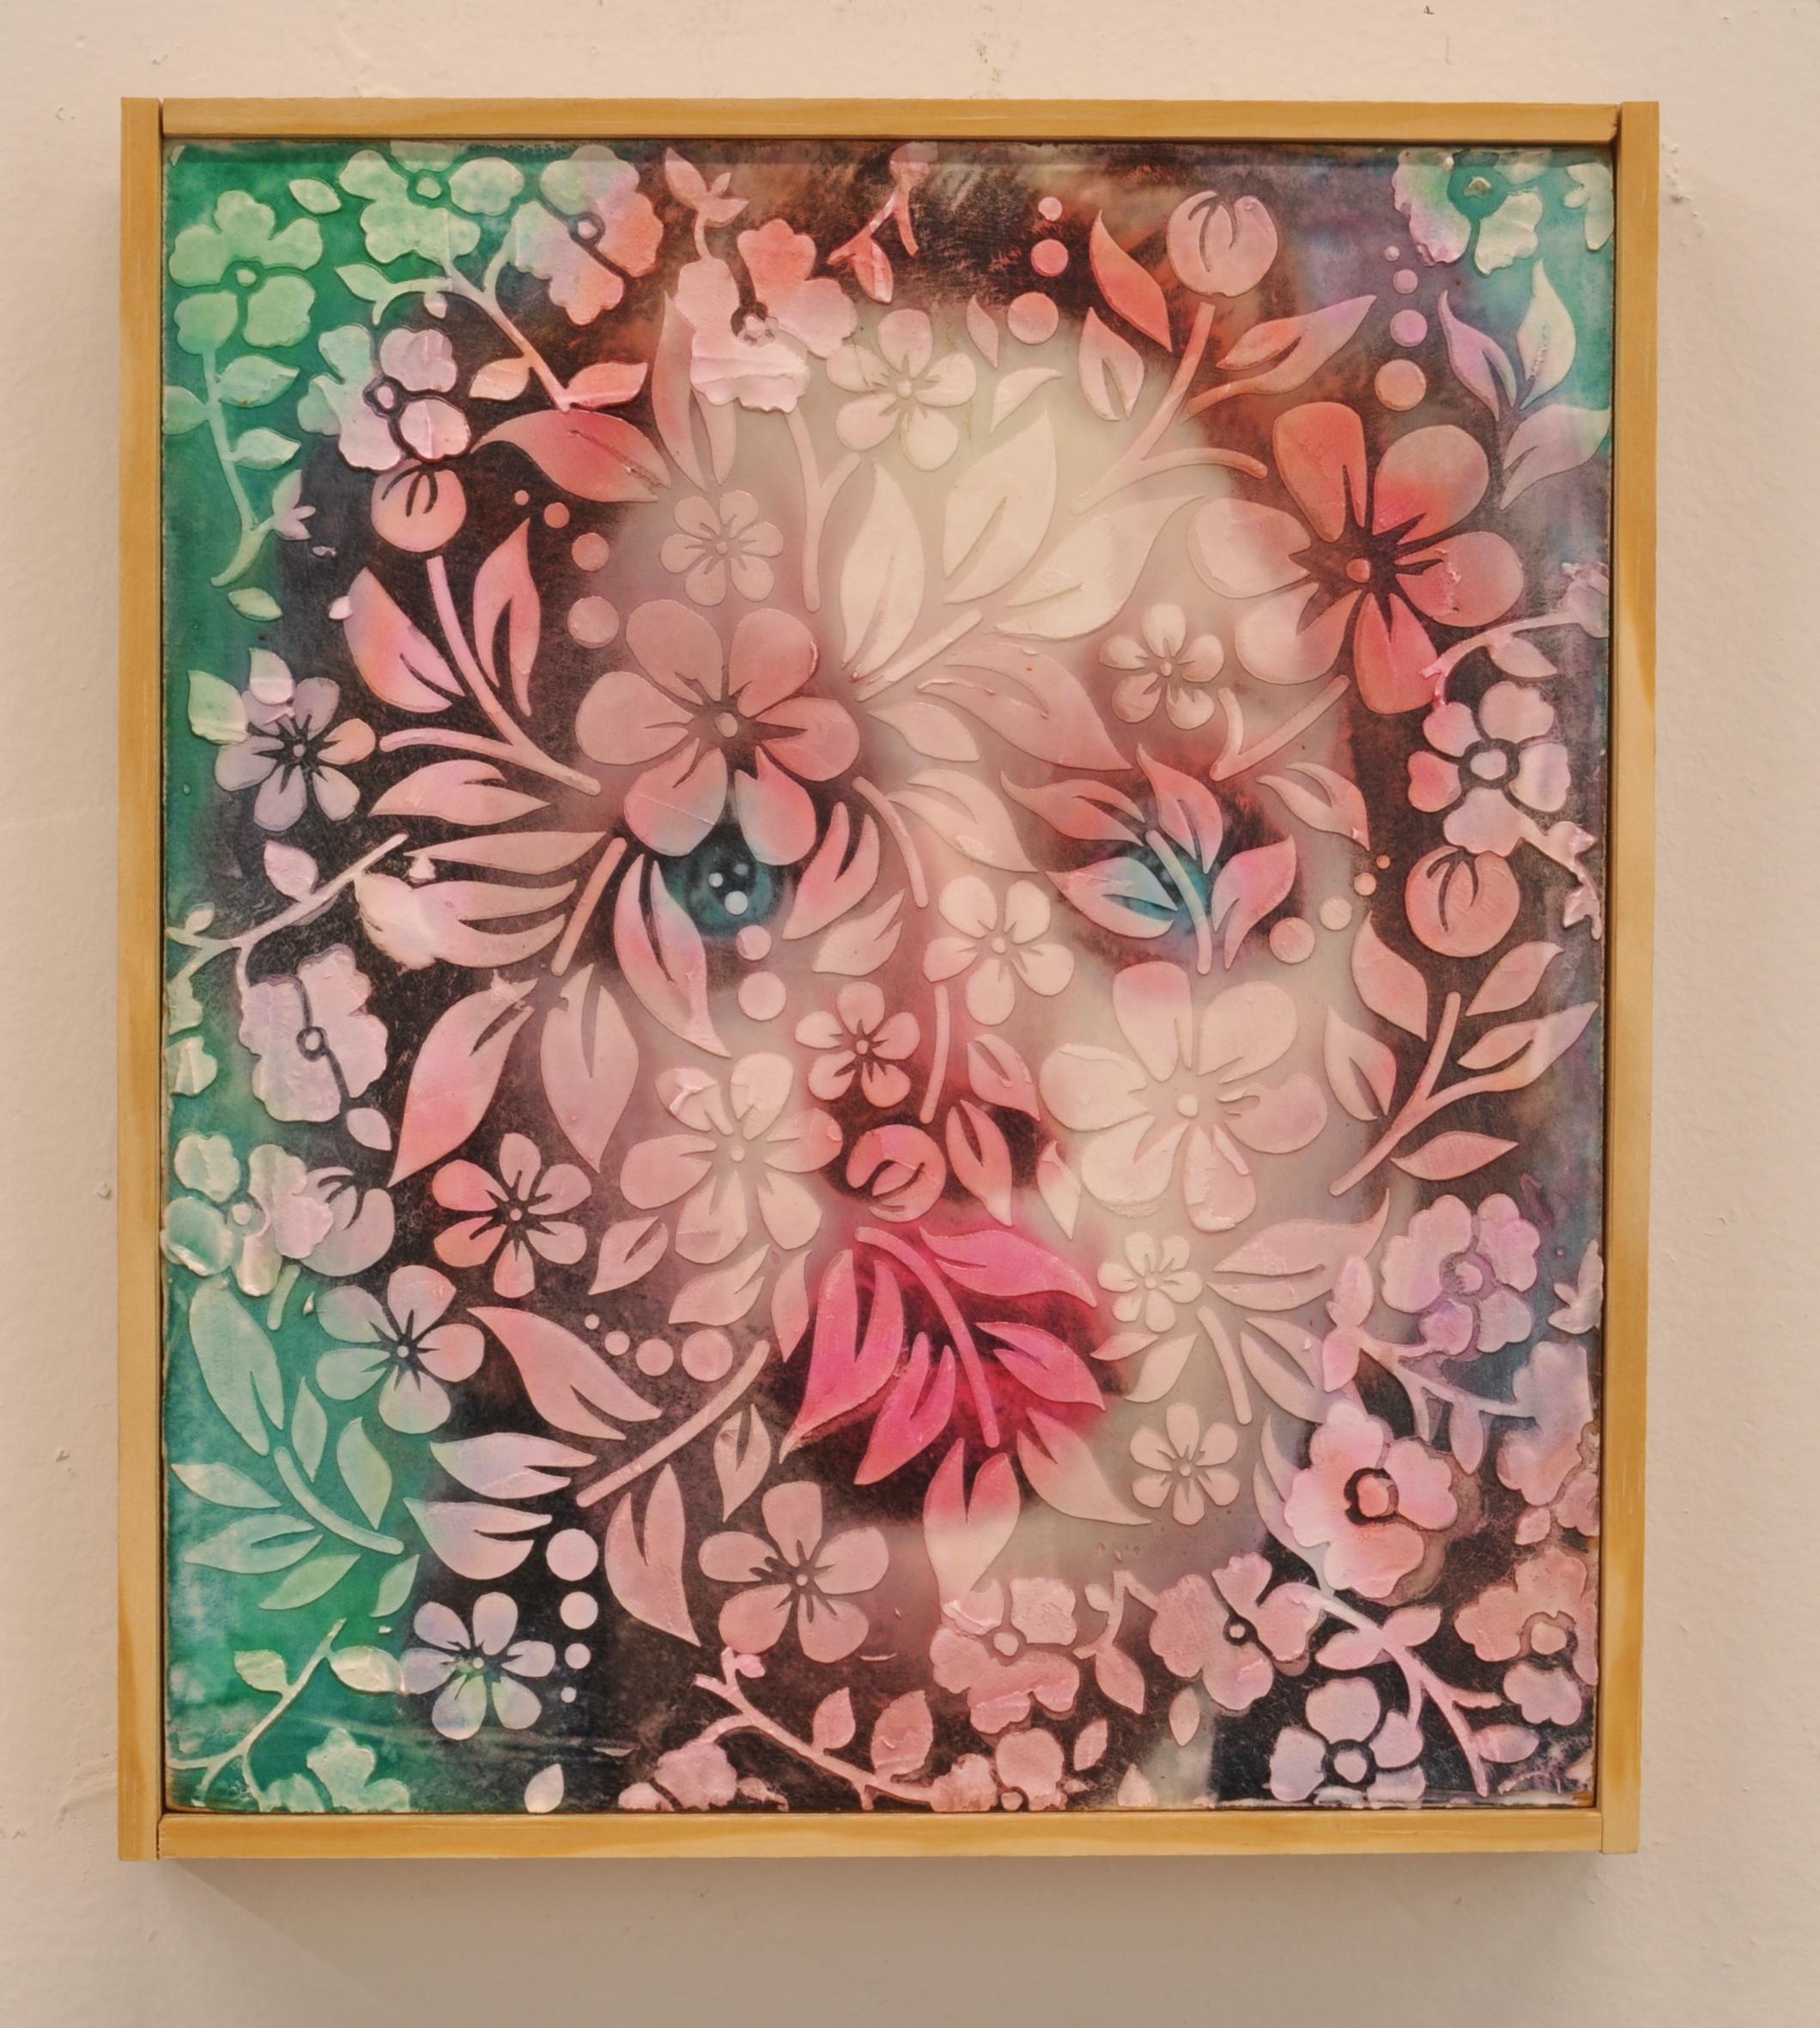 LUCIDITY - Mixed Media Portrait of a Woman w/ Textured Pattern Overlay - Framed - Painting by Matthew Dutton